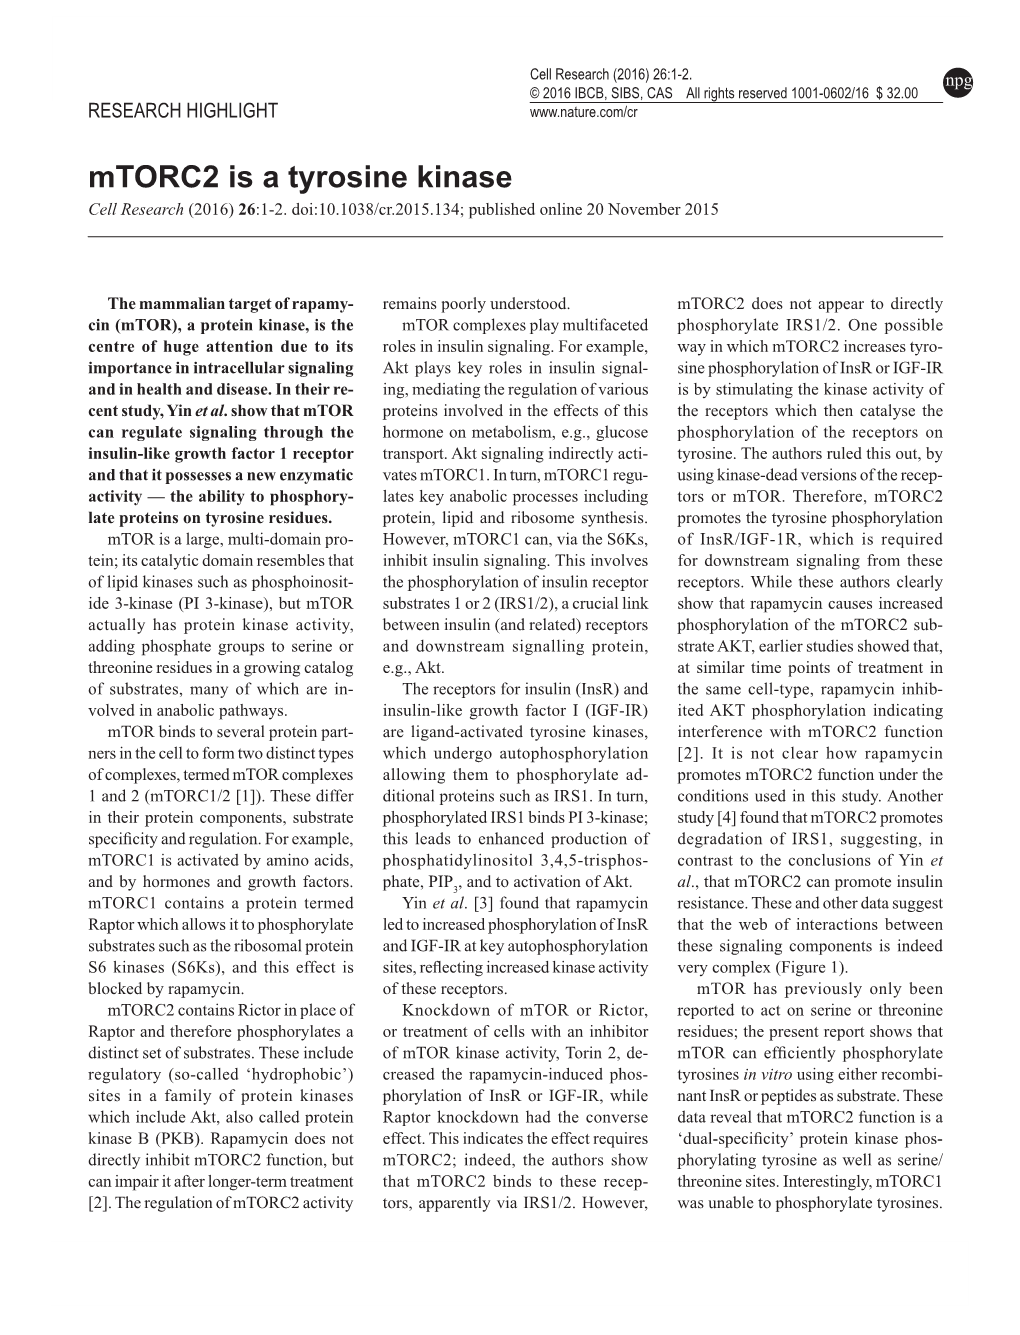 Mtorc2 Is a Tyrosine Kinase Cell Research (2016) 26:1-2